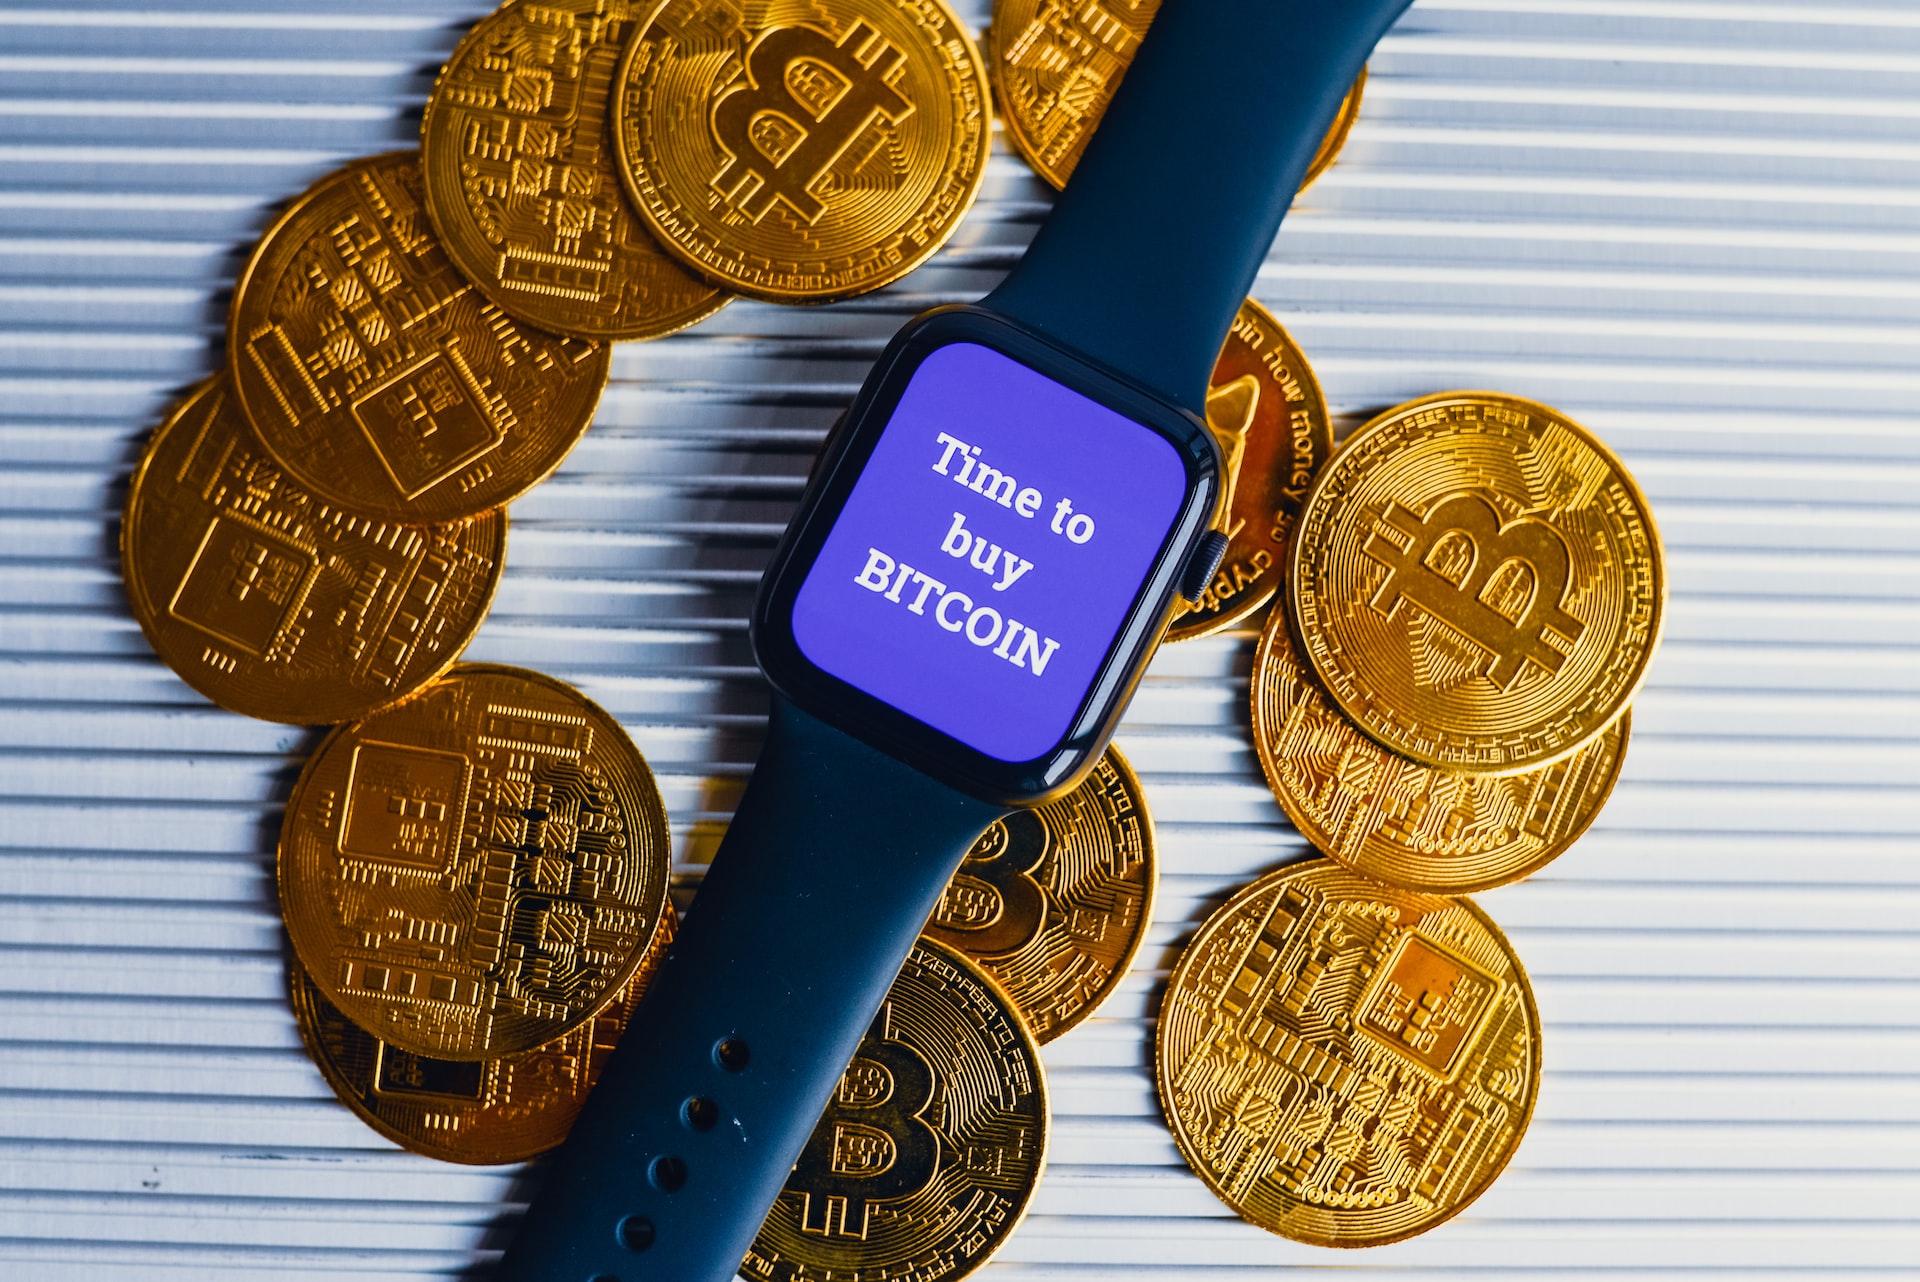 A blue wristwatch with a face that says ‘time to but Bitcoin’ with 13 pieces of bitcoins around it